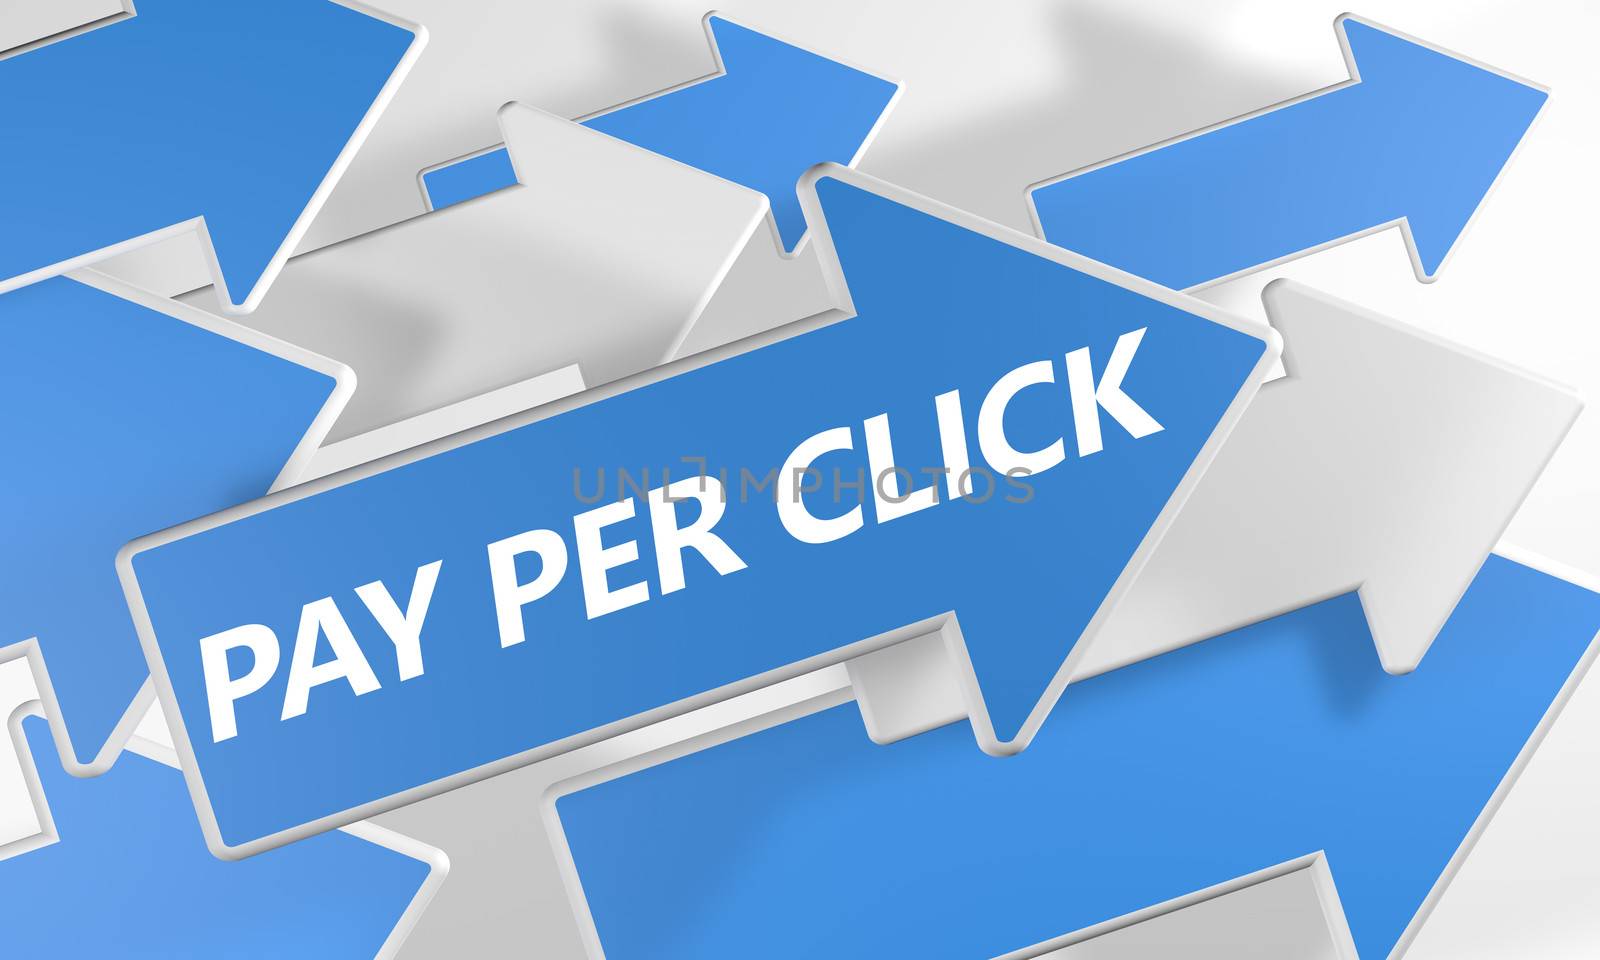 Pay per Click 3d render concept with blue and white arrows flying upwards over a white background.